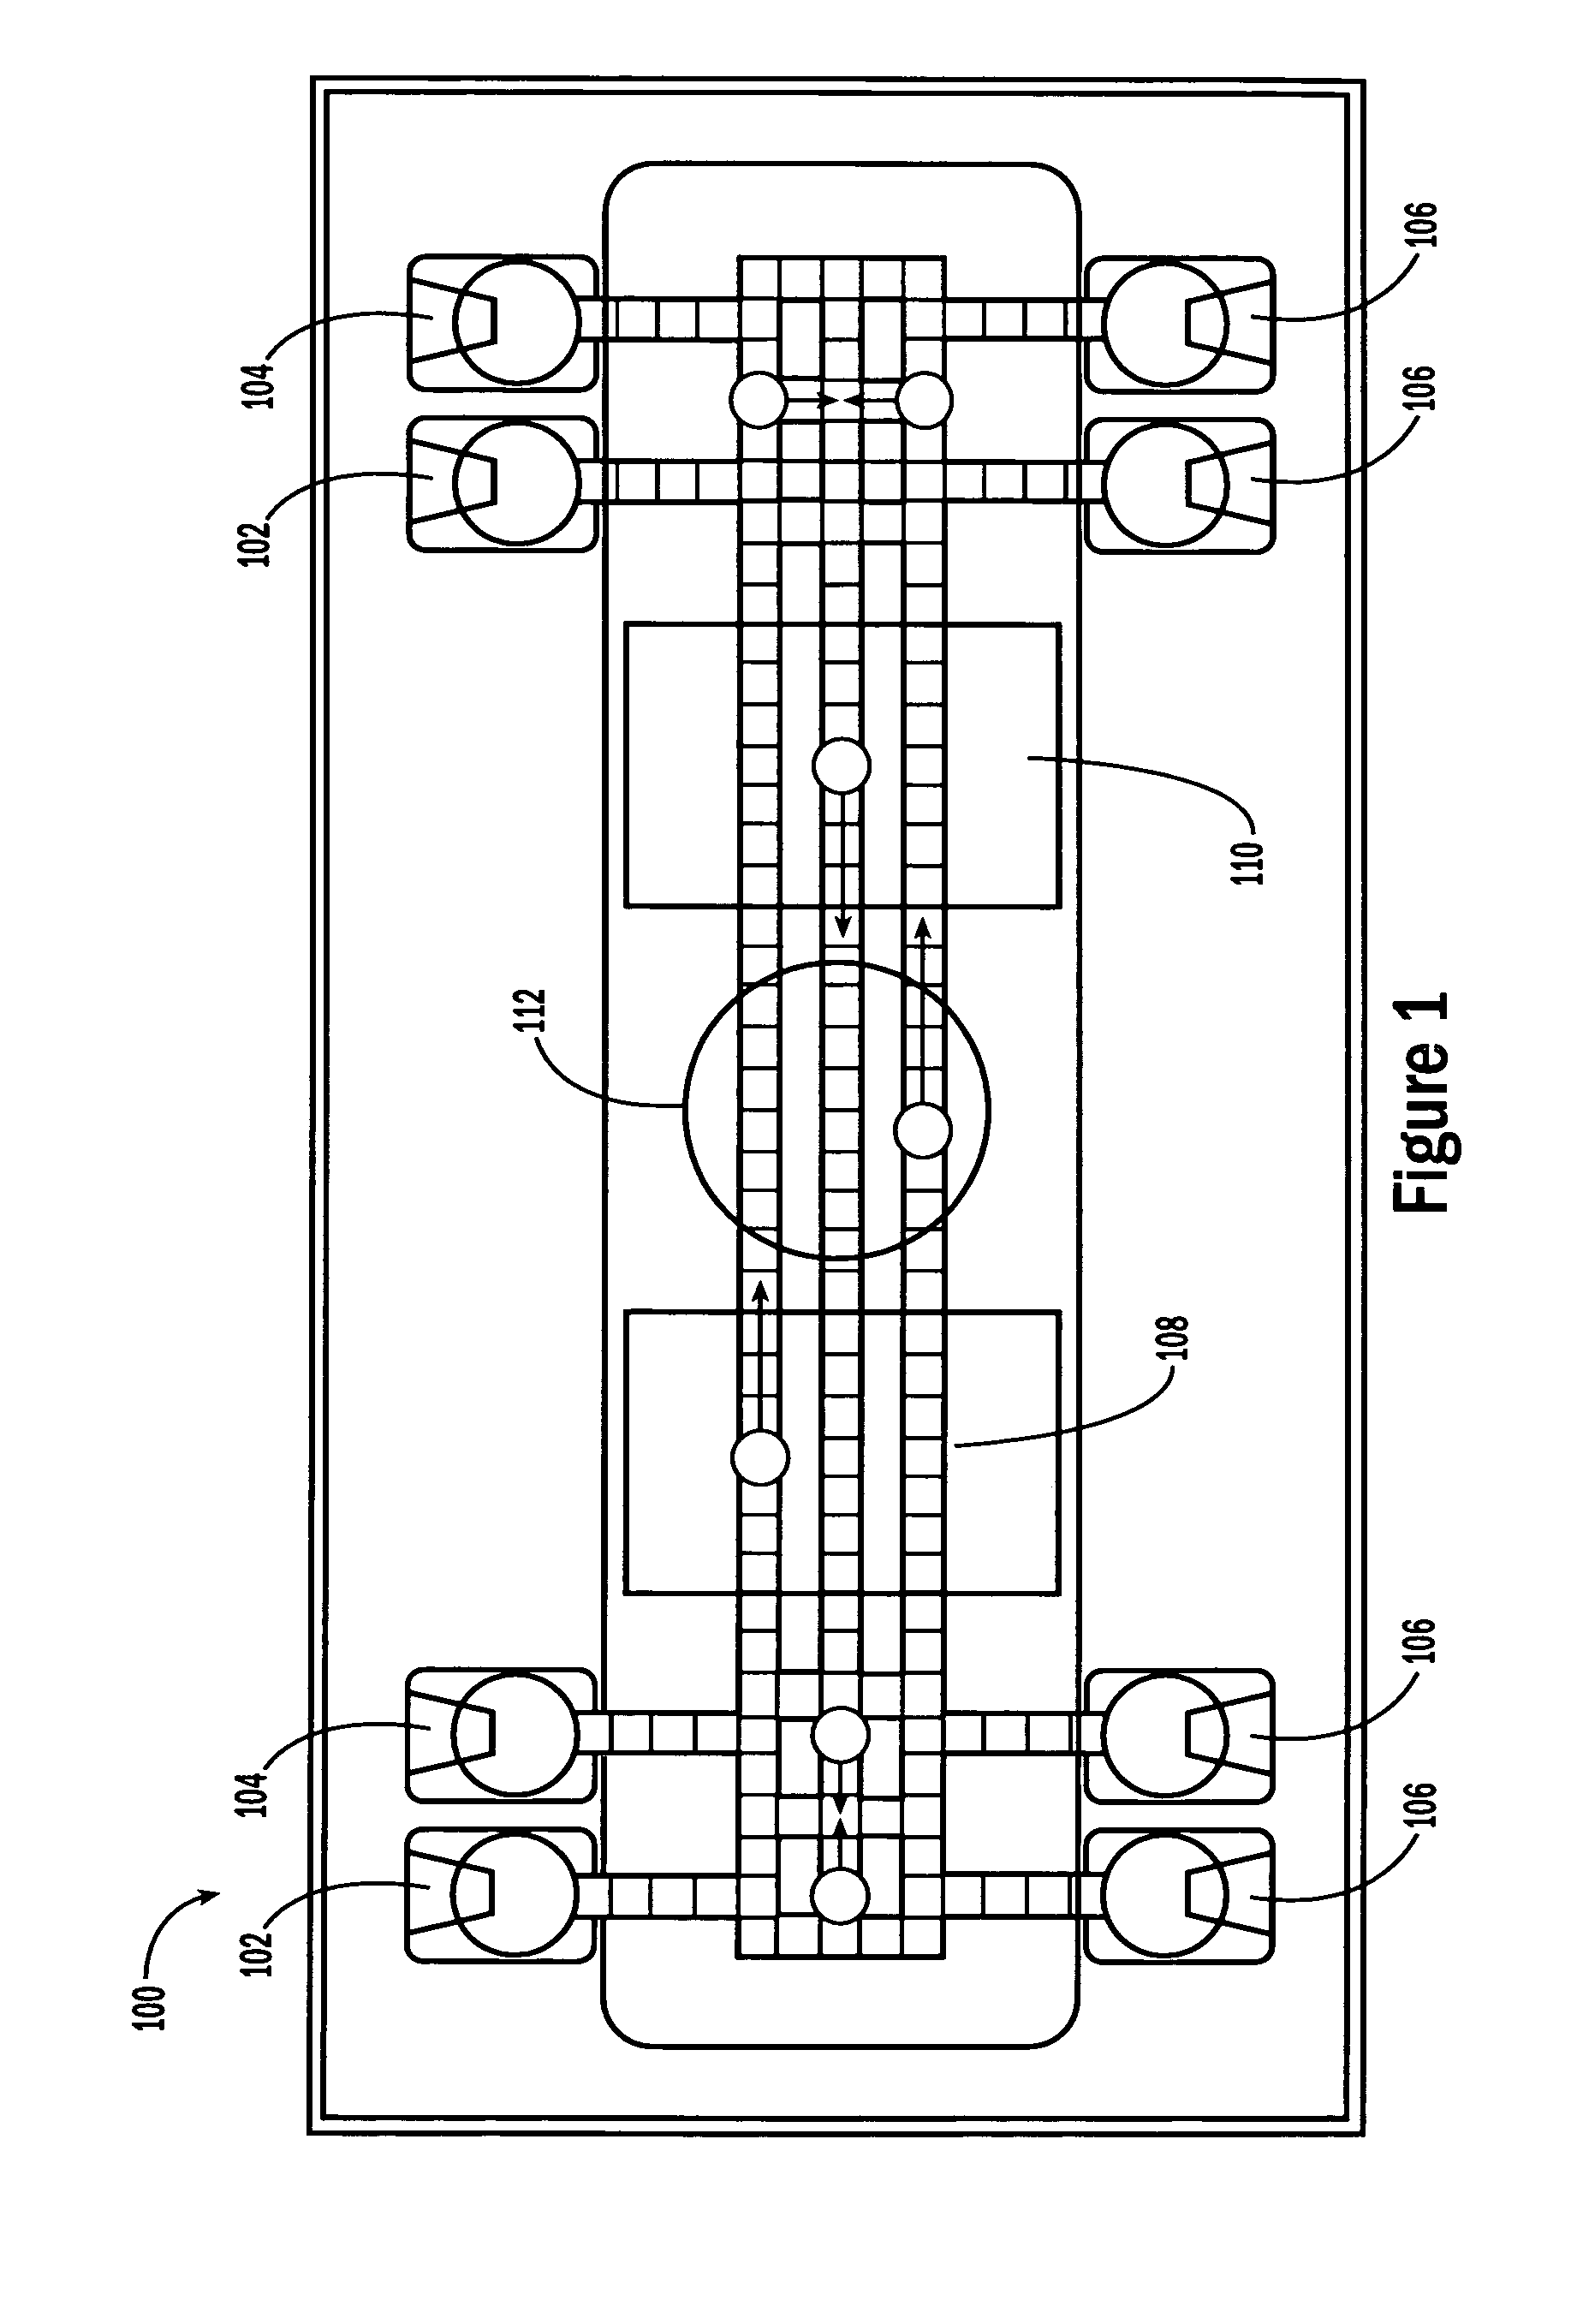 Droplet actuation system and method